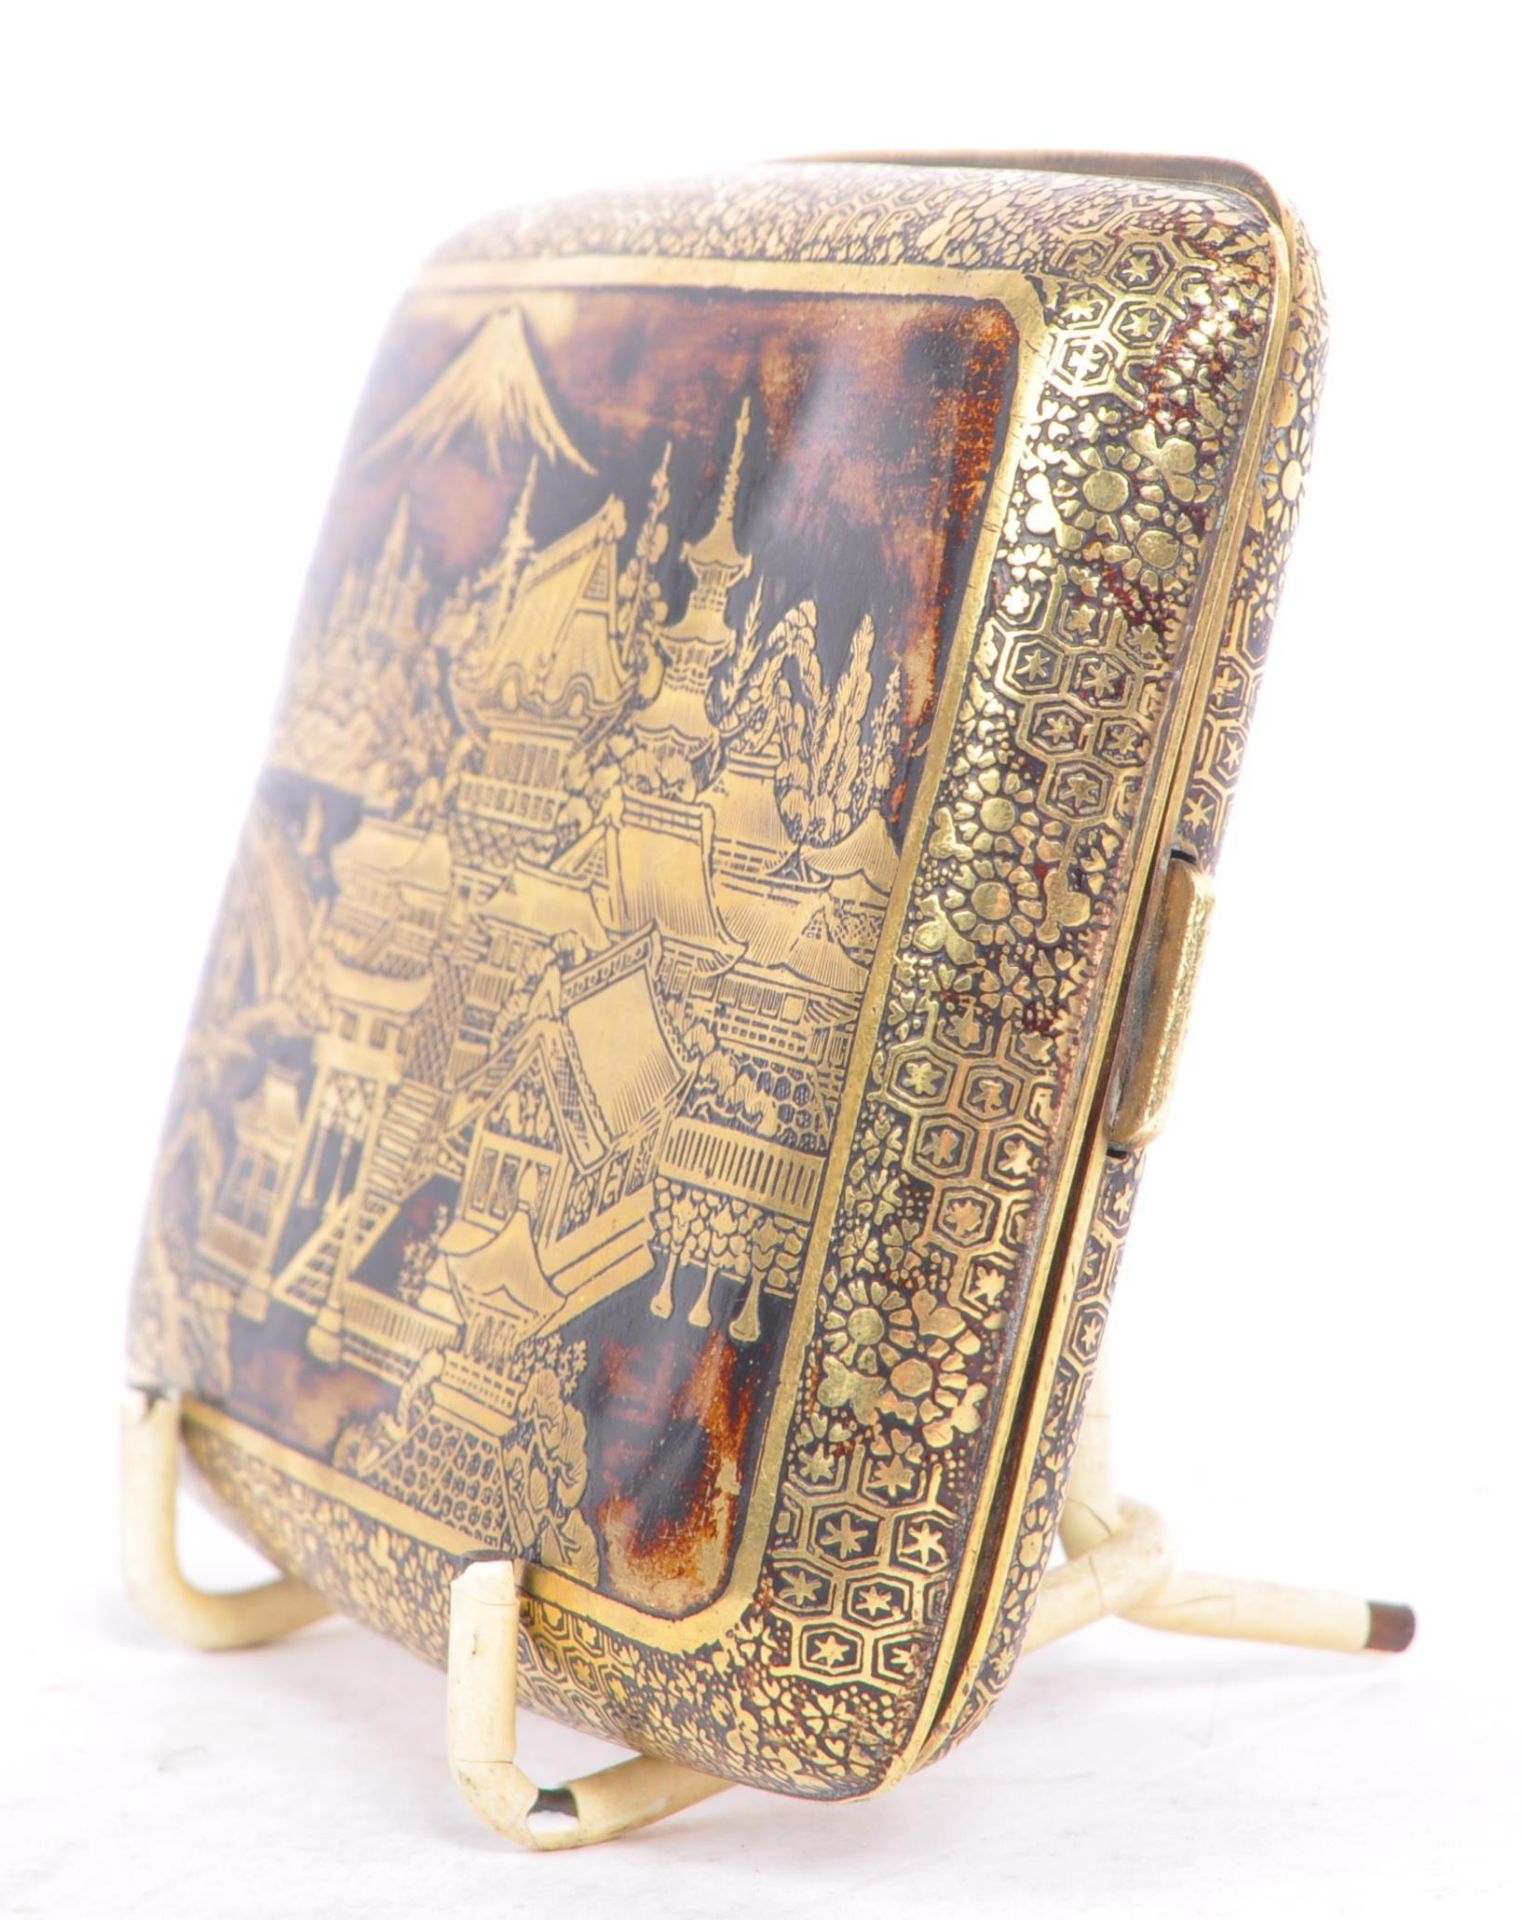 1940S VINTAGE BRASS CHINESE CIGARETTE CASE - Image 3 of 8